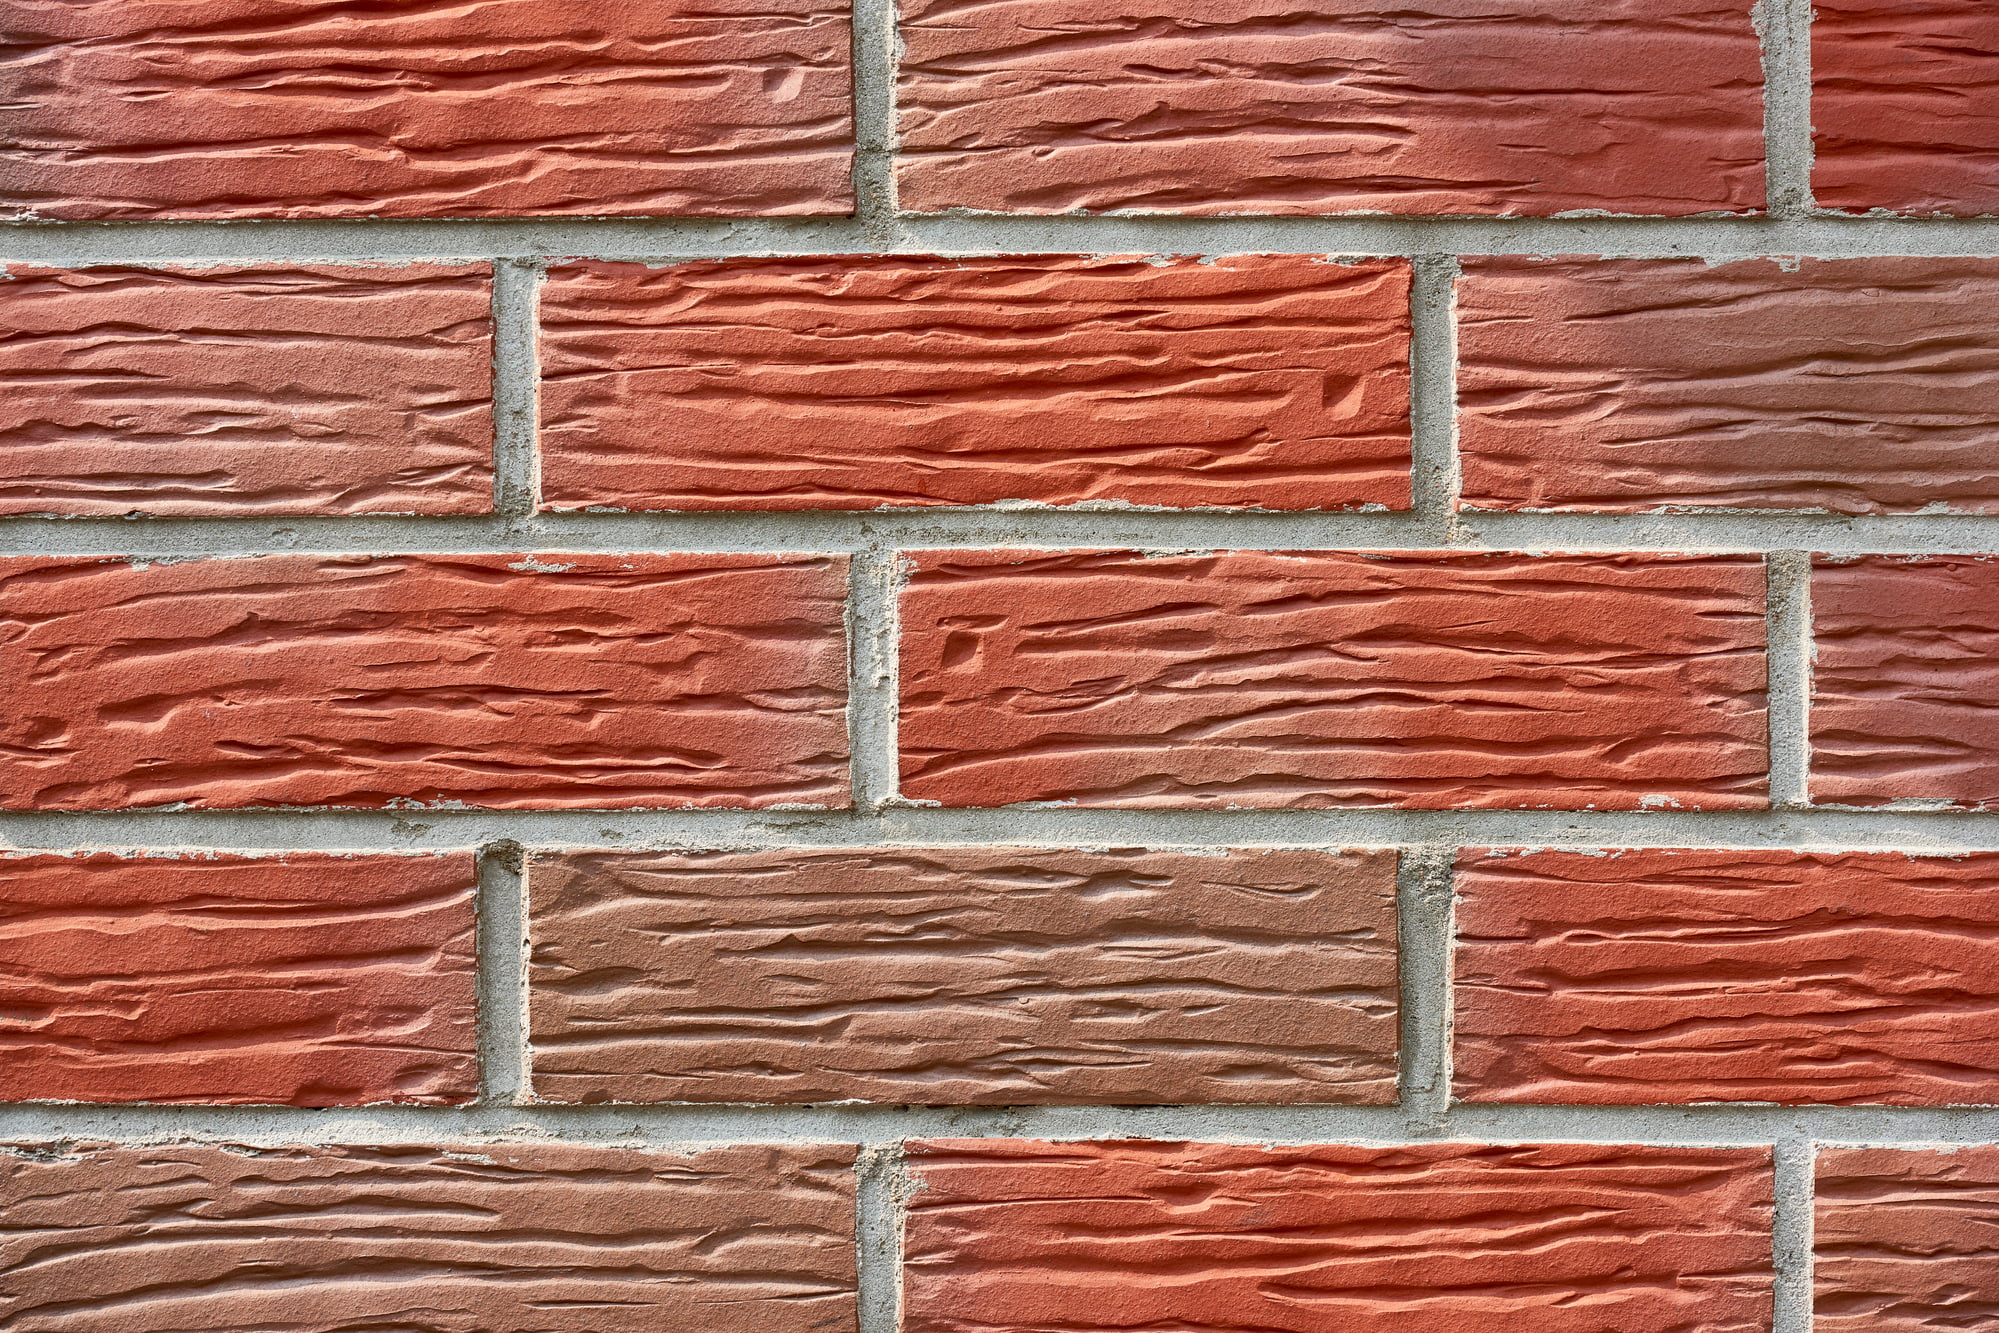 House-hunting for brick homes? Not all “brick” homes are created equal – here’s what you need to know about brick veneer houses before you buy.